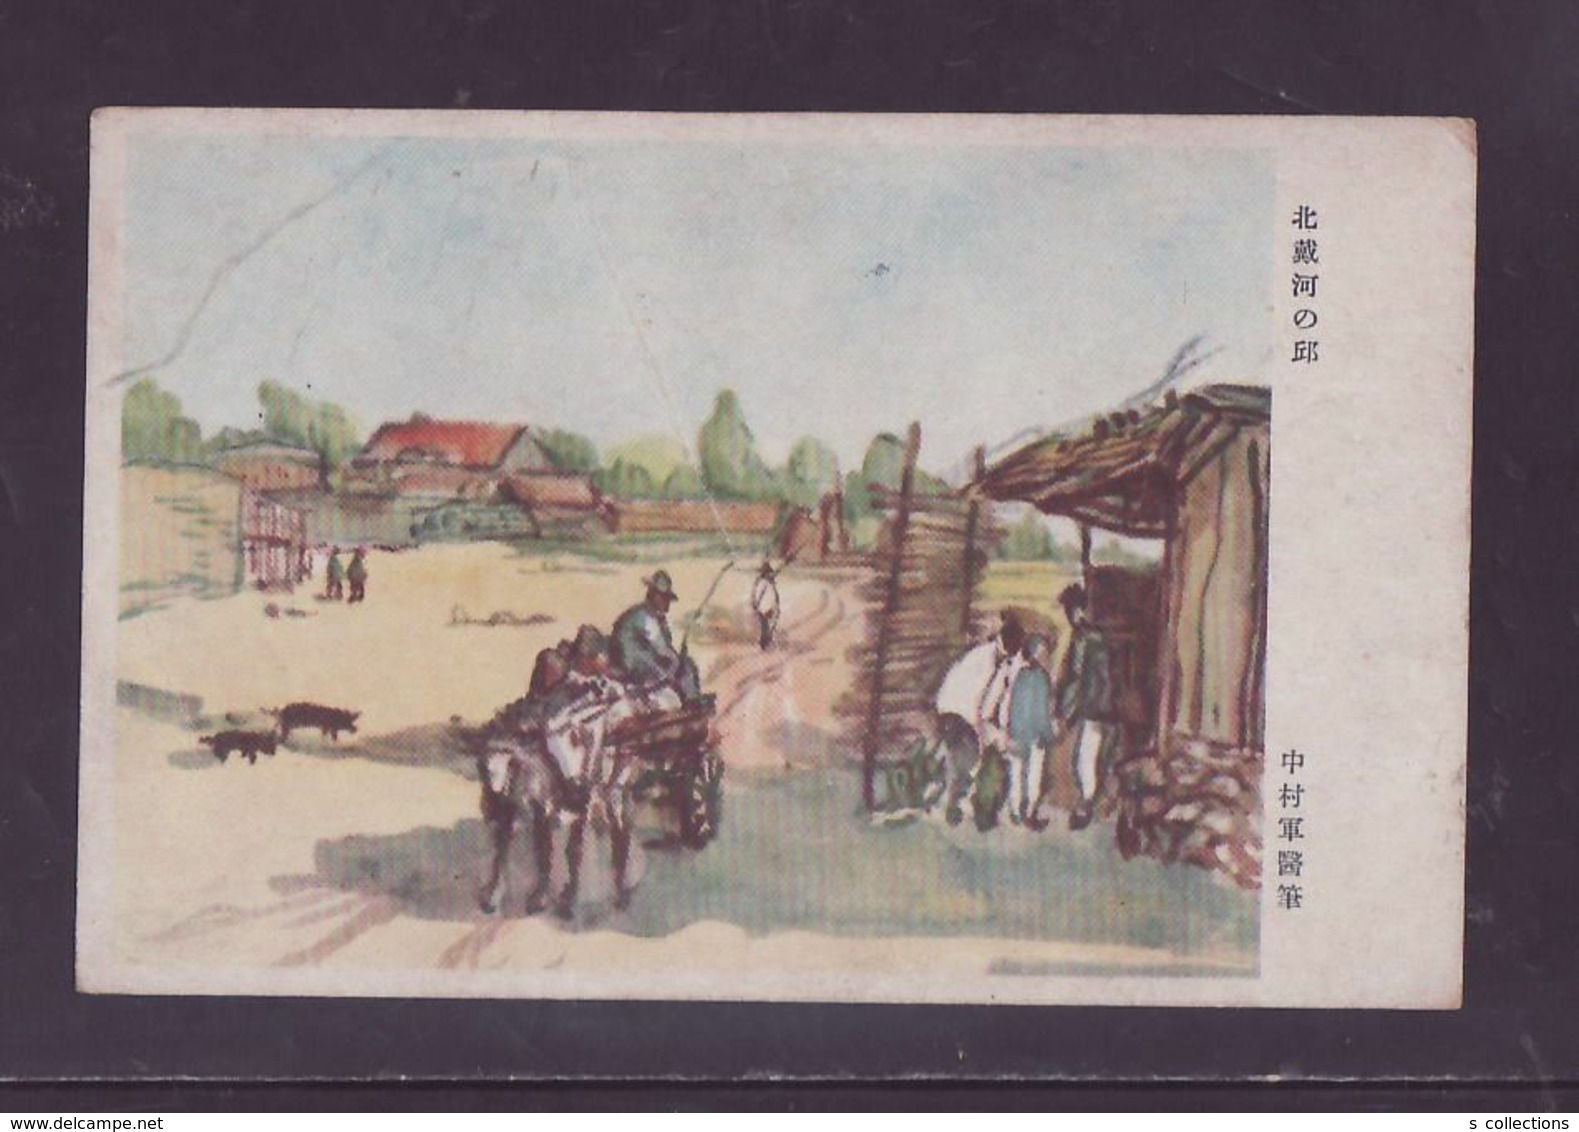 JAPAN WWII Military Hill Of Beidaihe Picture Postcard North China WW2 MANCHURIA CHINE MANDCHOUKOUO JAPON GIAPPONE - 1941-45 Chine Du Nord